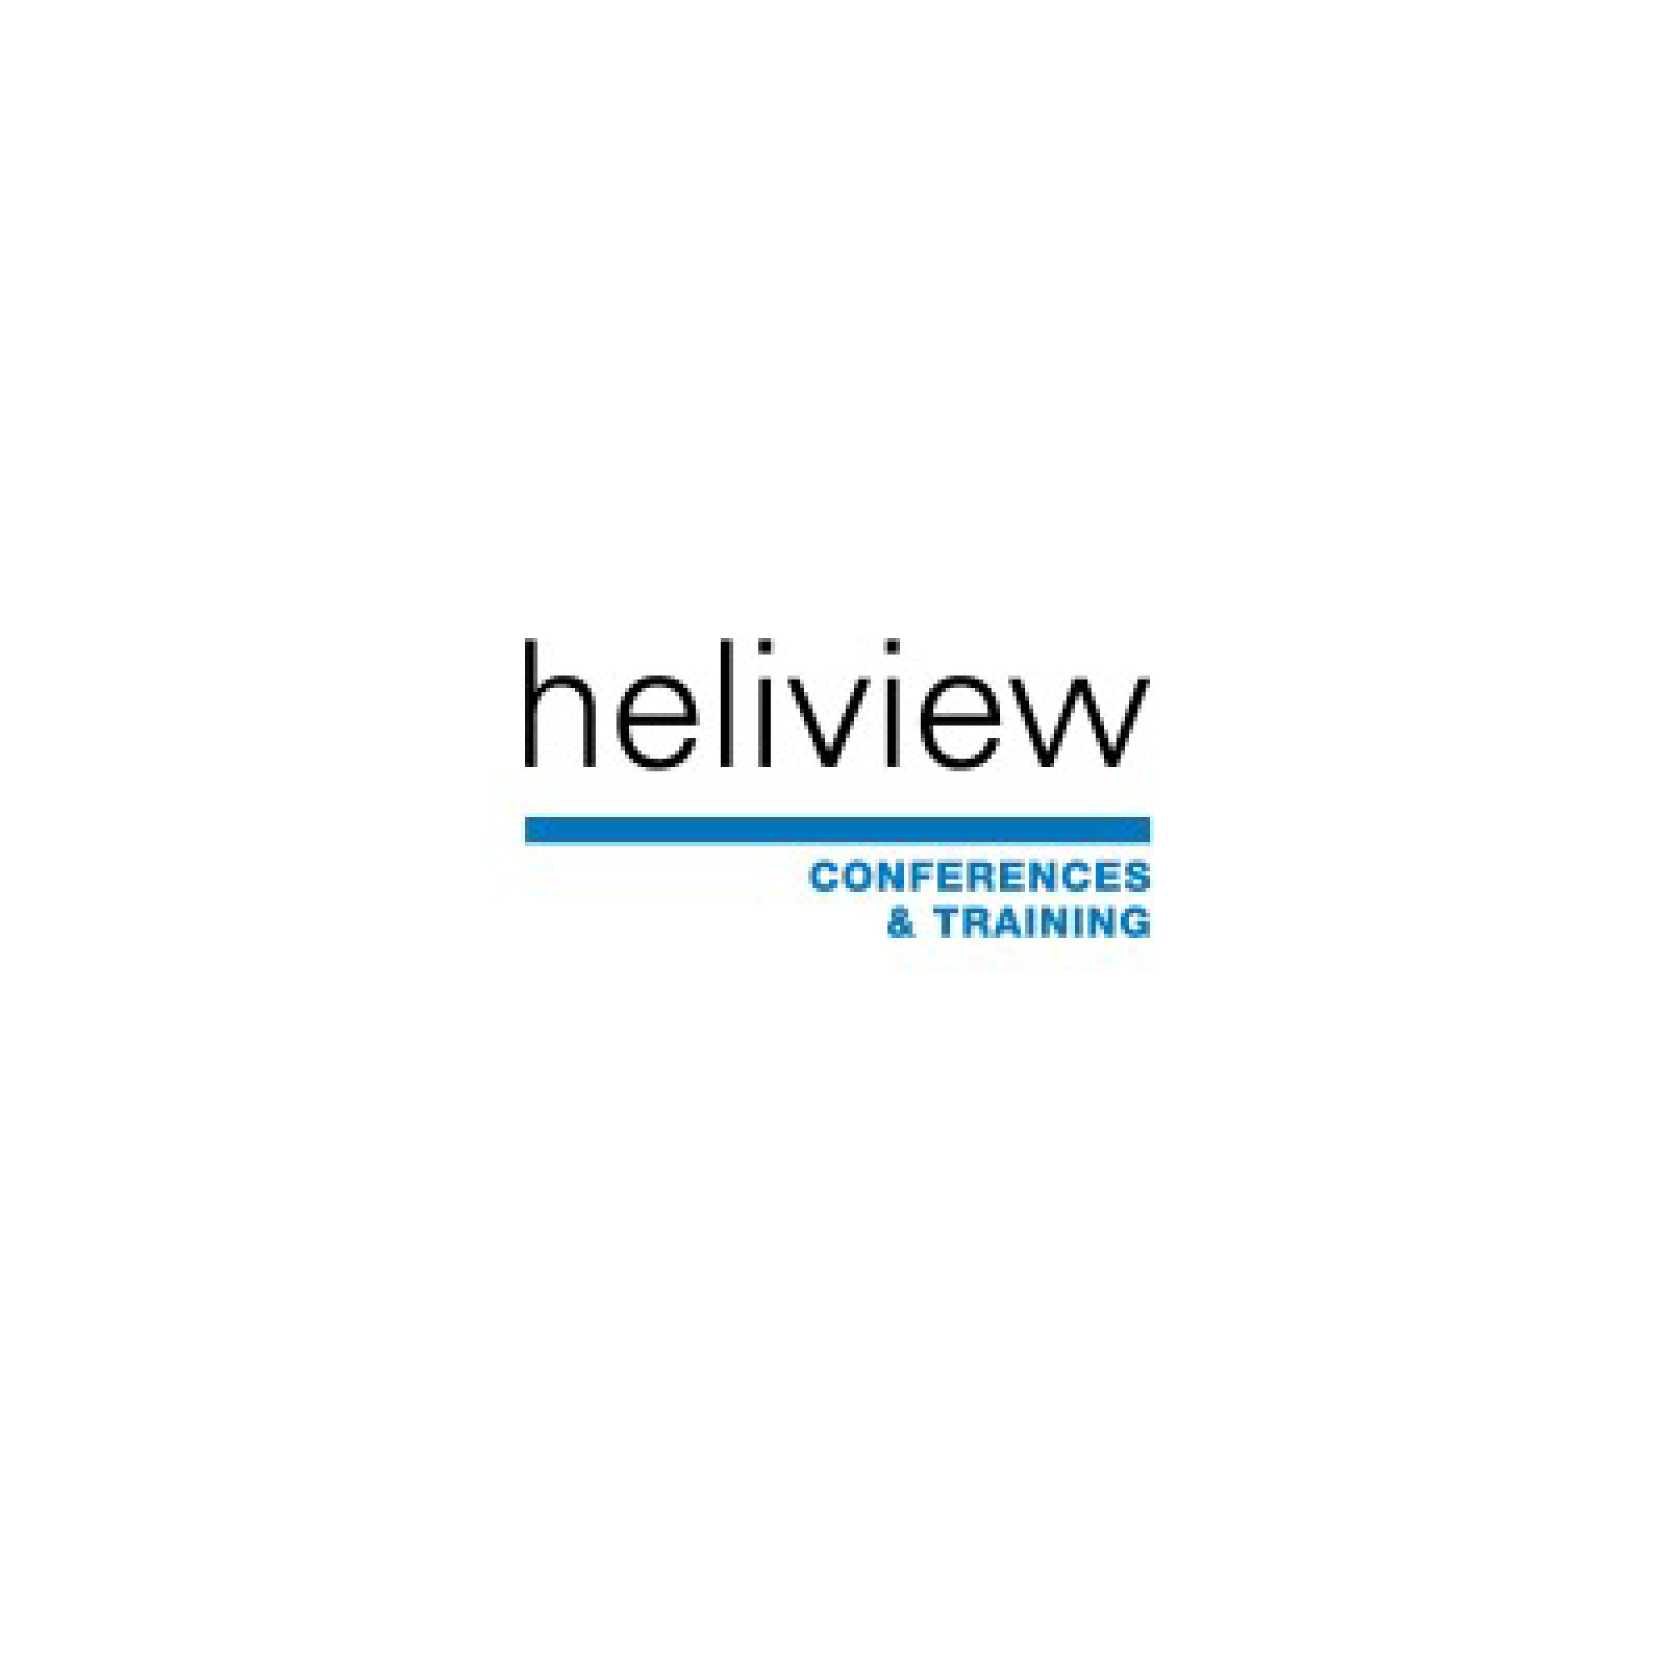 Heliview